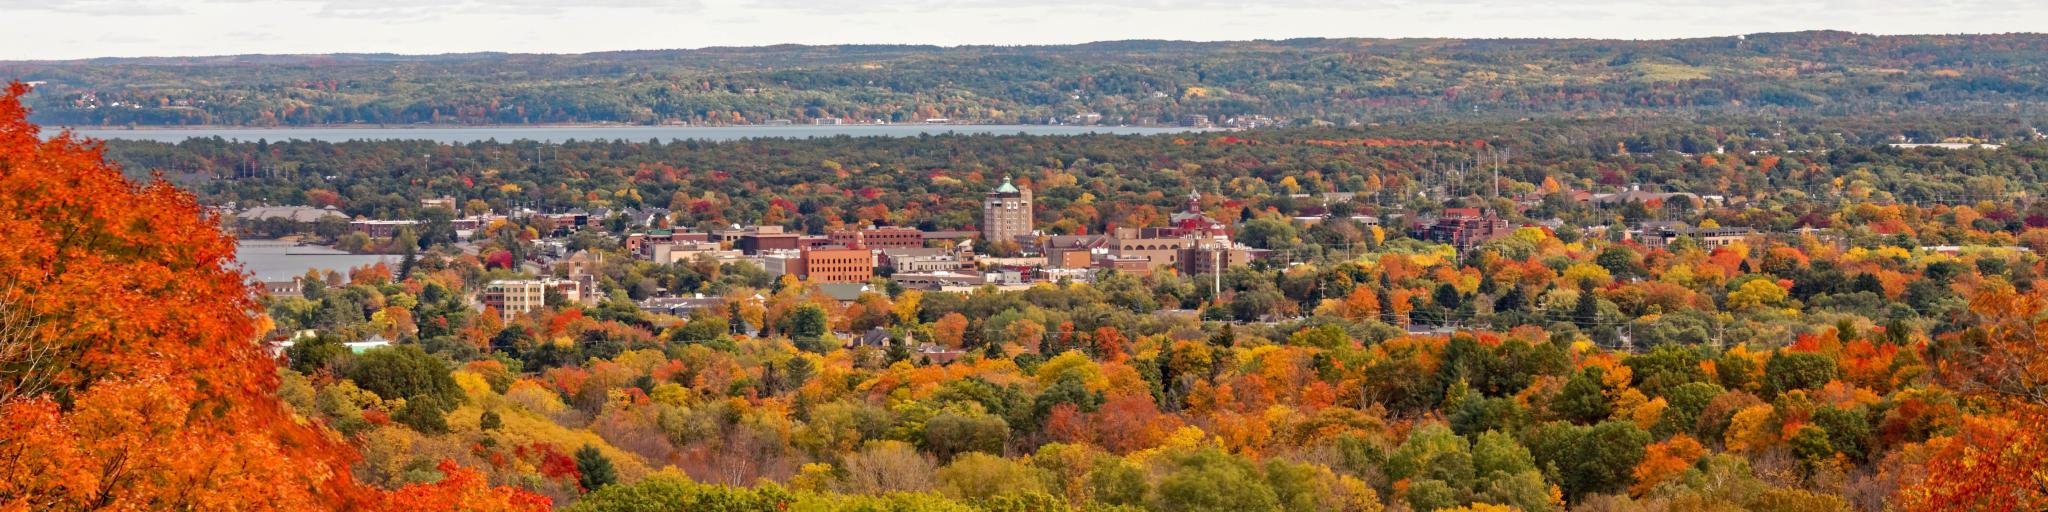 Landscape of Traverse city in Autumn, surrounded by golden trees and the bright clear sky